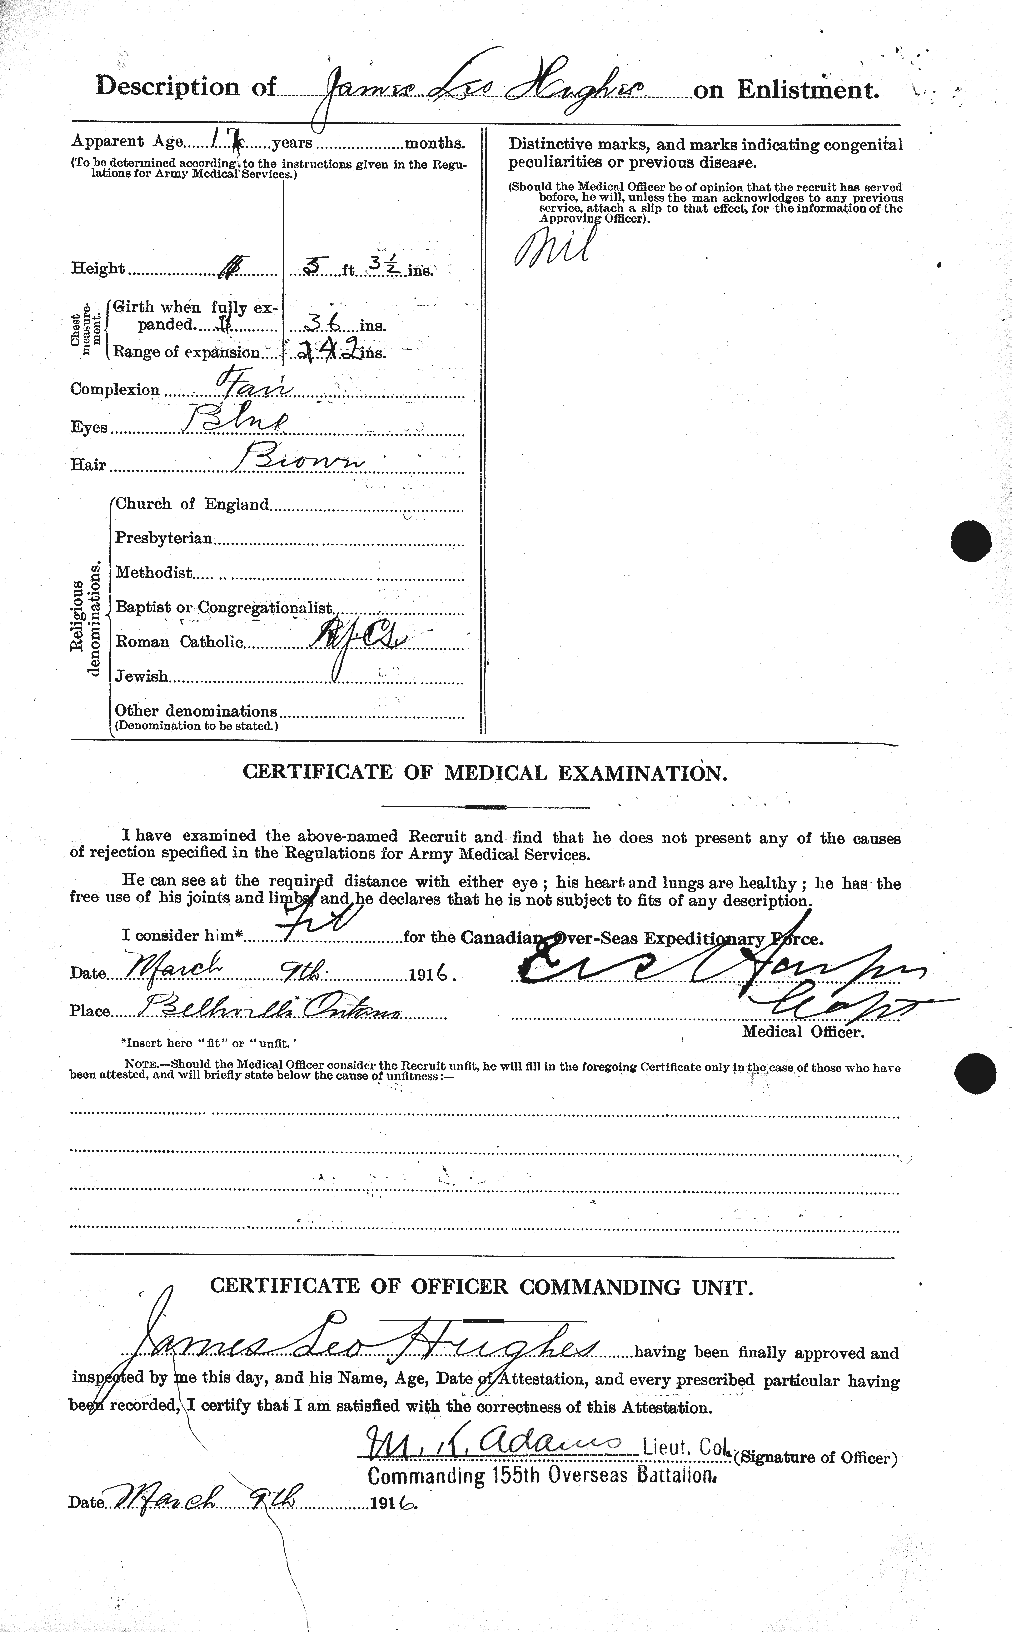 Personnel Records of the First World War - CEF 403967b